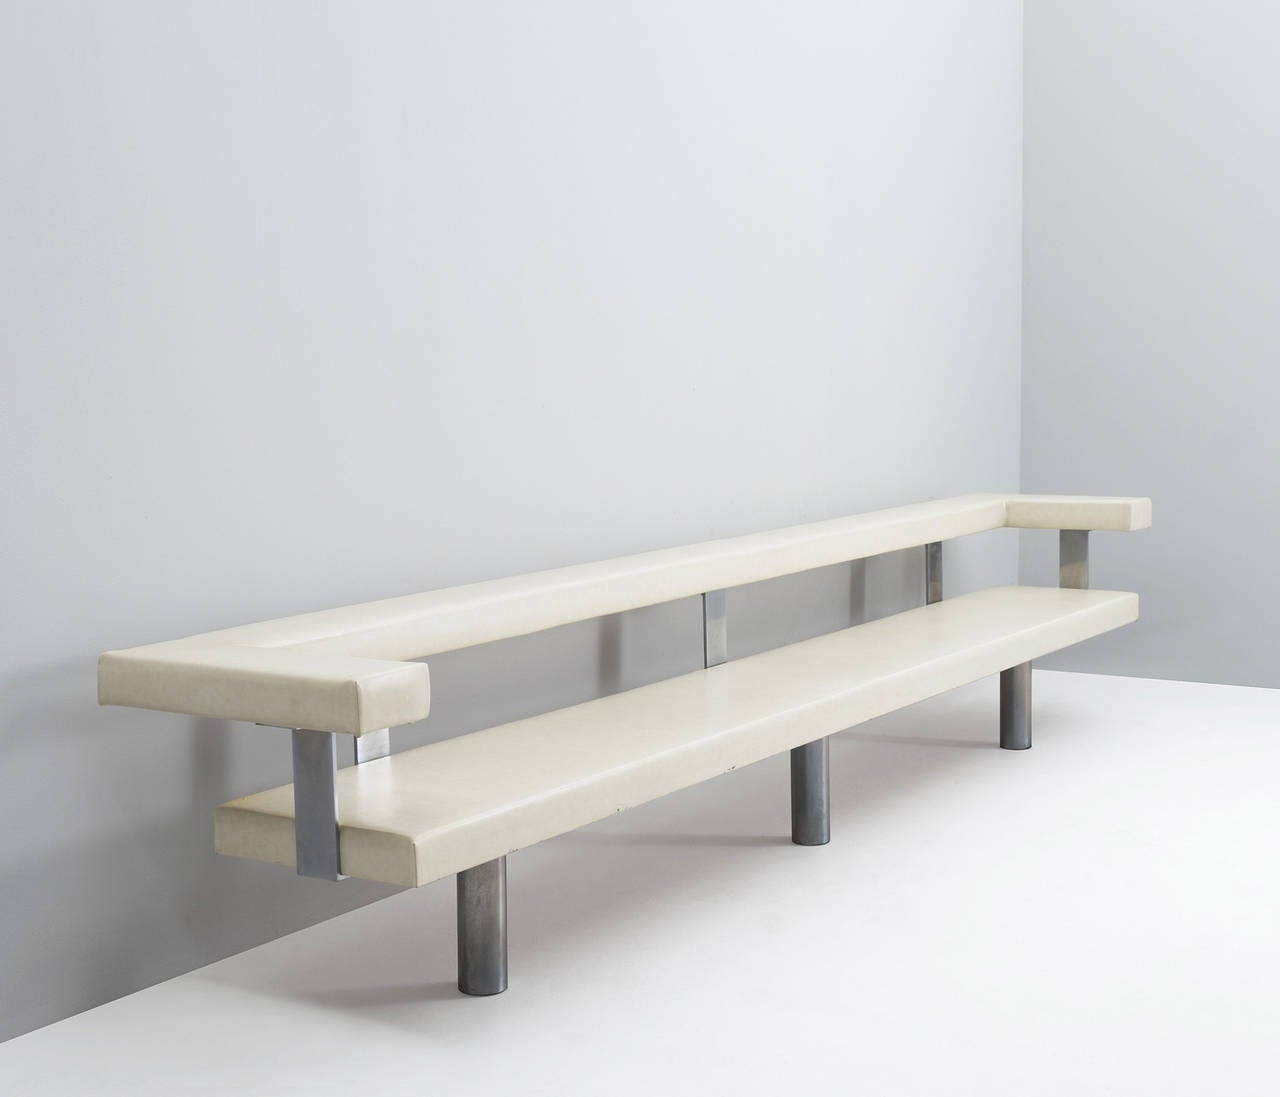 Very long unique bench or sofa designed by architects G.W. Rietveld and J. Tricht, the Netherlands, 1960s.

This sofa / bench was originally designed as a 'hall bench' function.
J. Tricht was a partner from 1965 by Gerrit Rietveld, in the